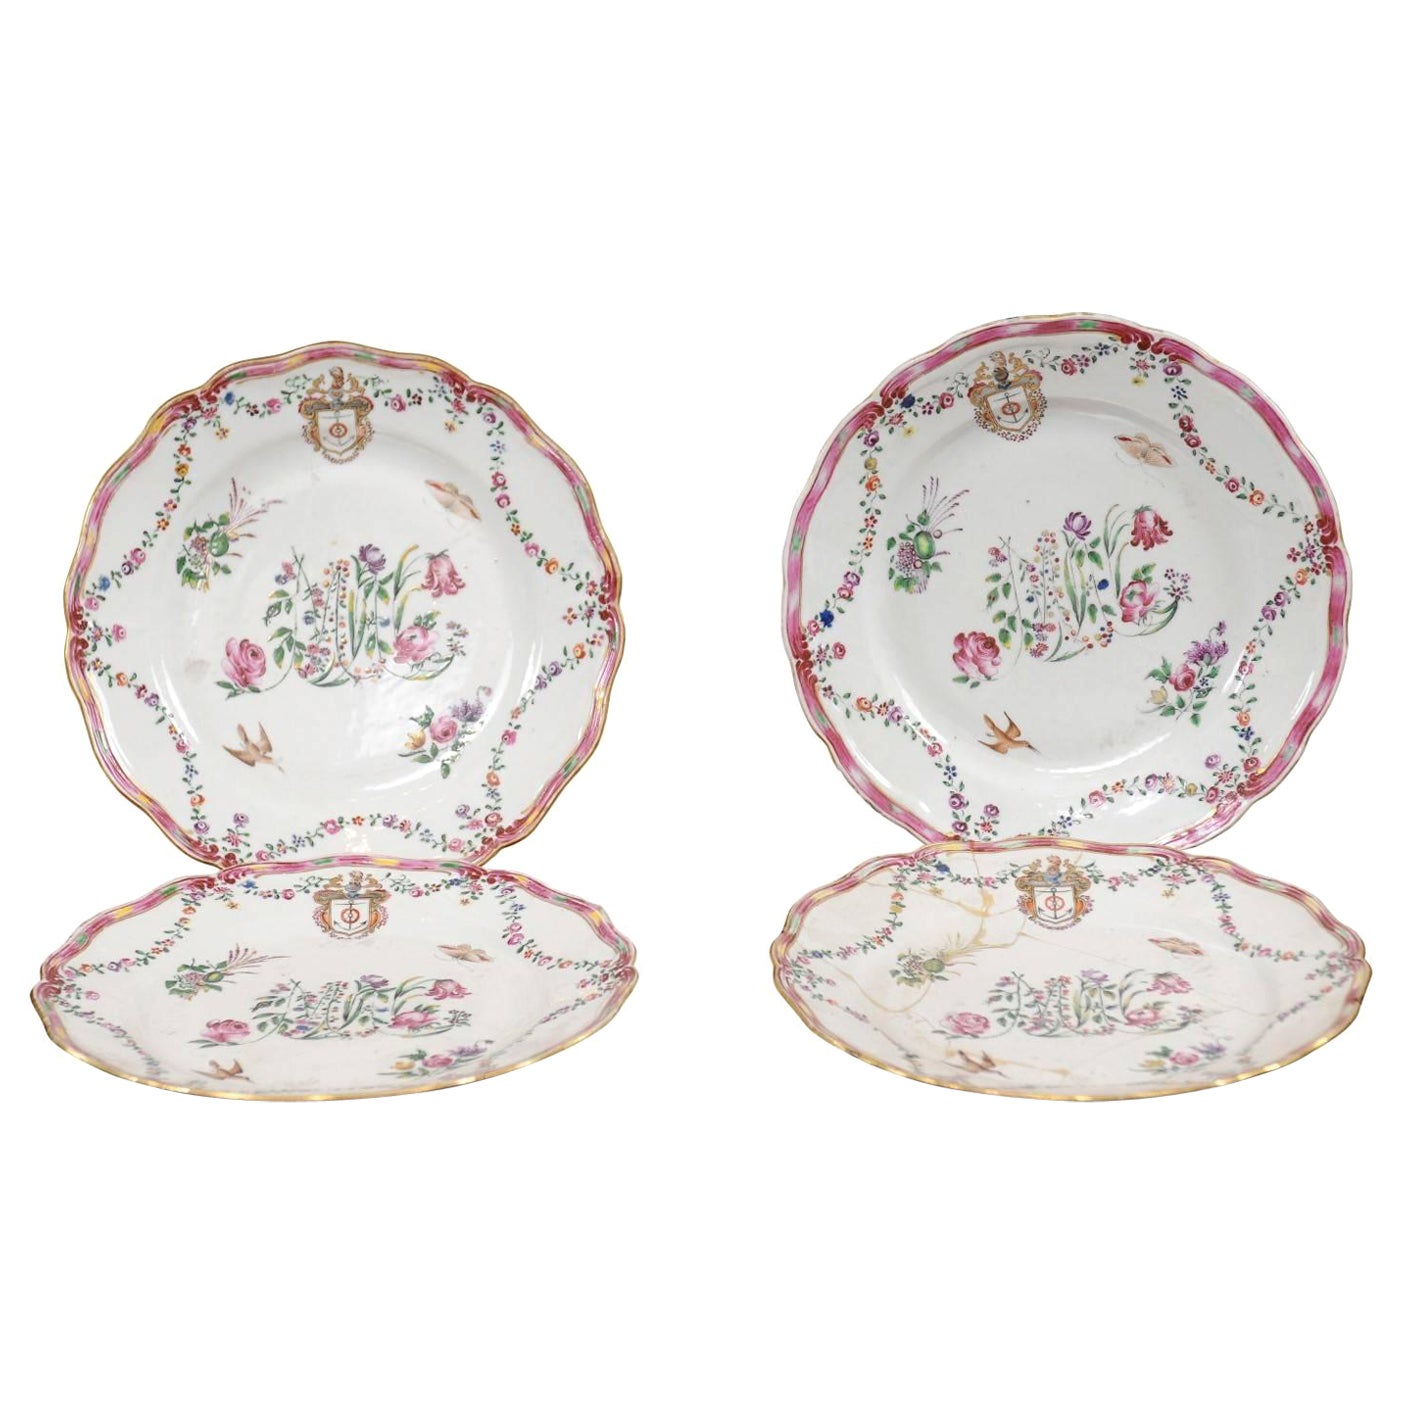 Set of 4 Chinese Export Porcelain Plates with Floral Decoration & Armorial Crest